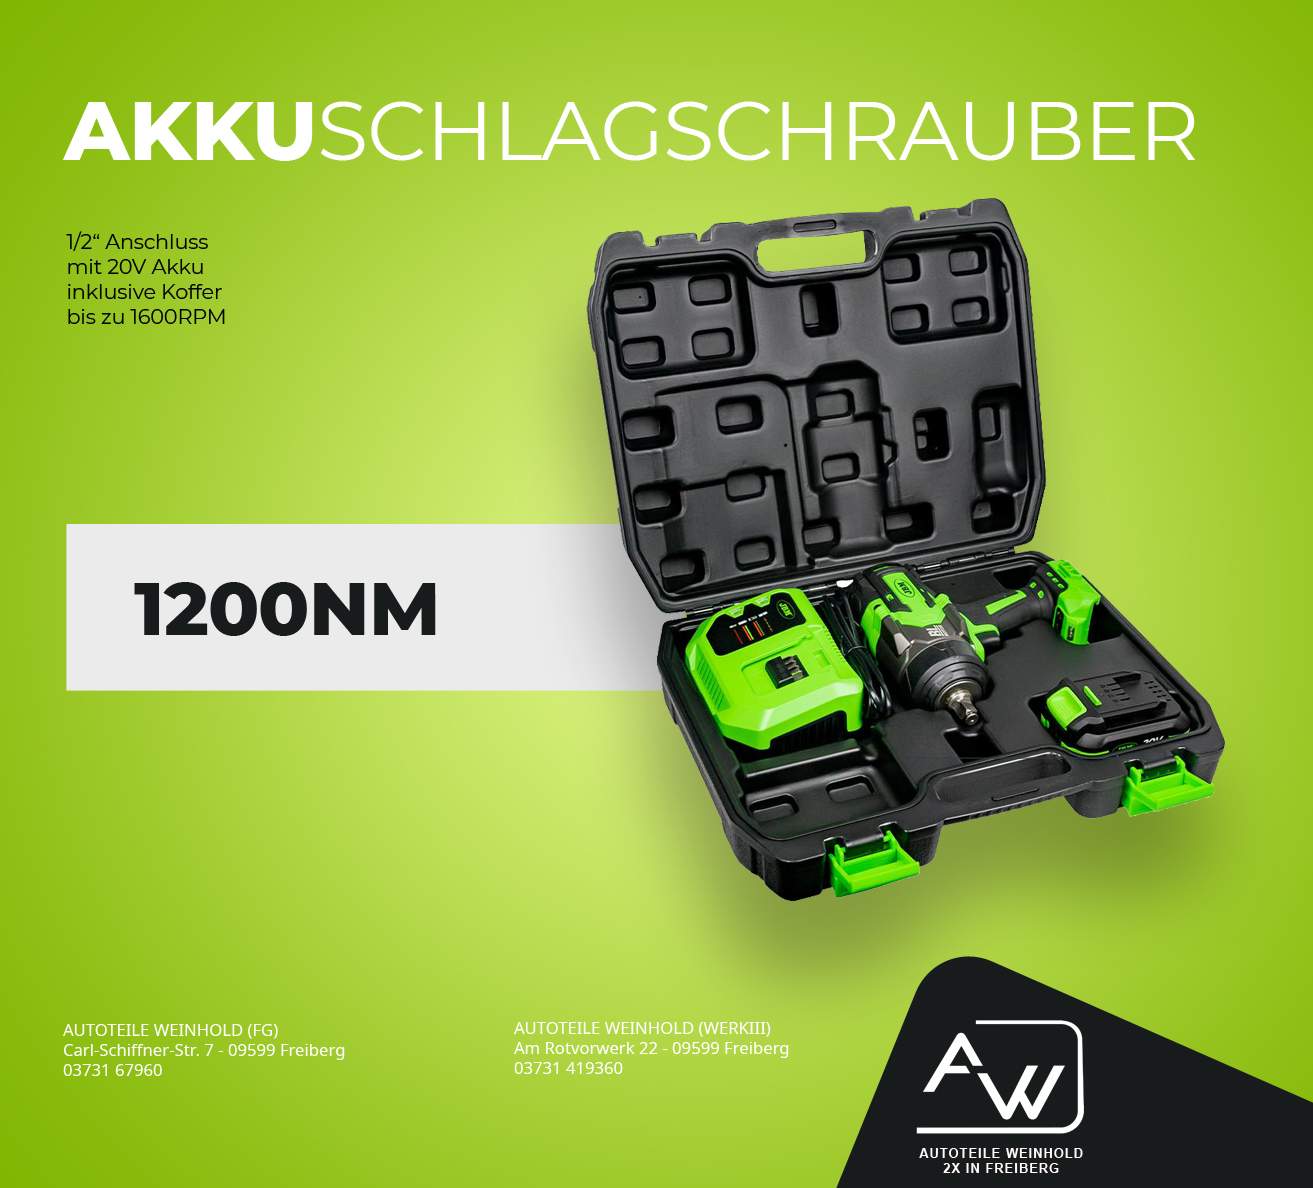 You are currently viewing AKKU Schlagschrauber mit 1200NM